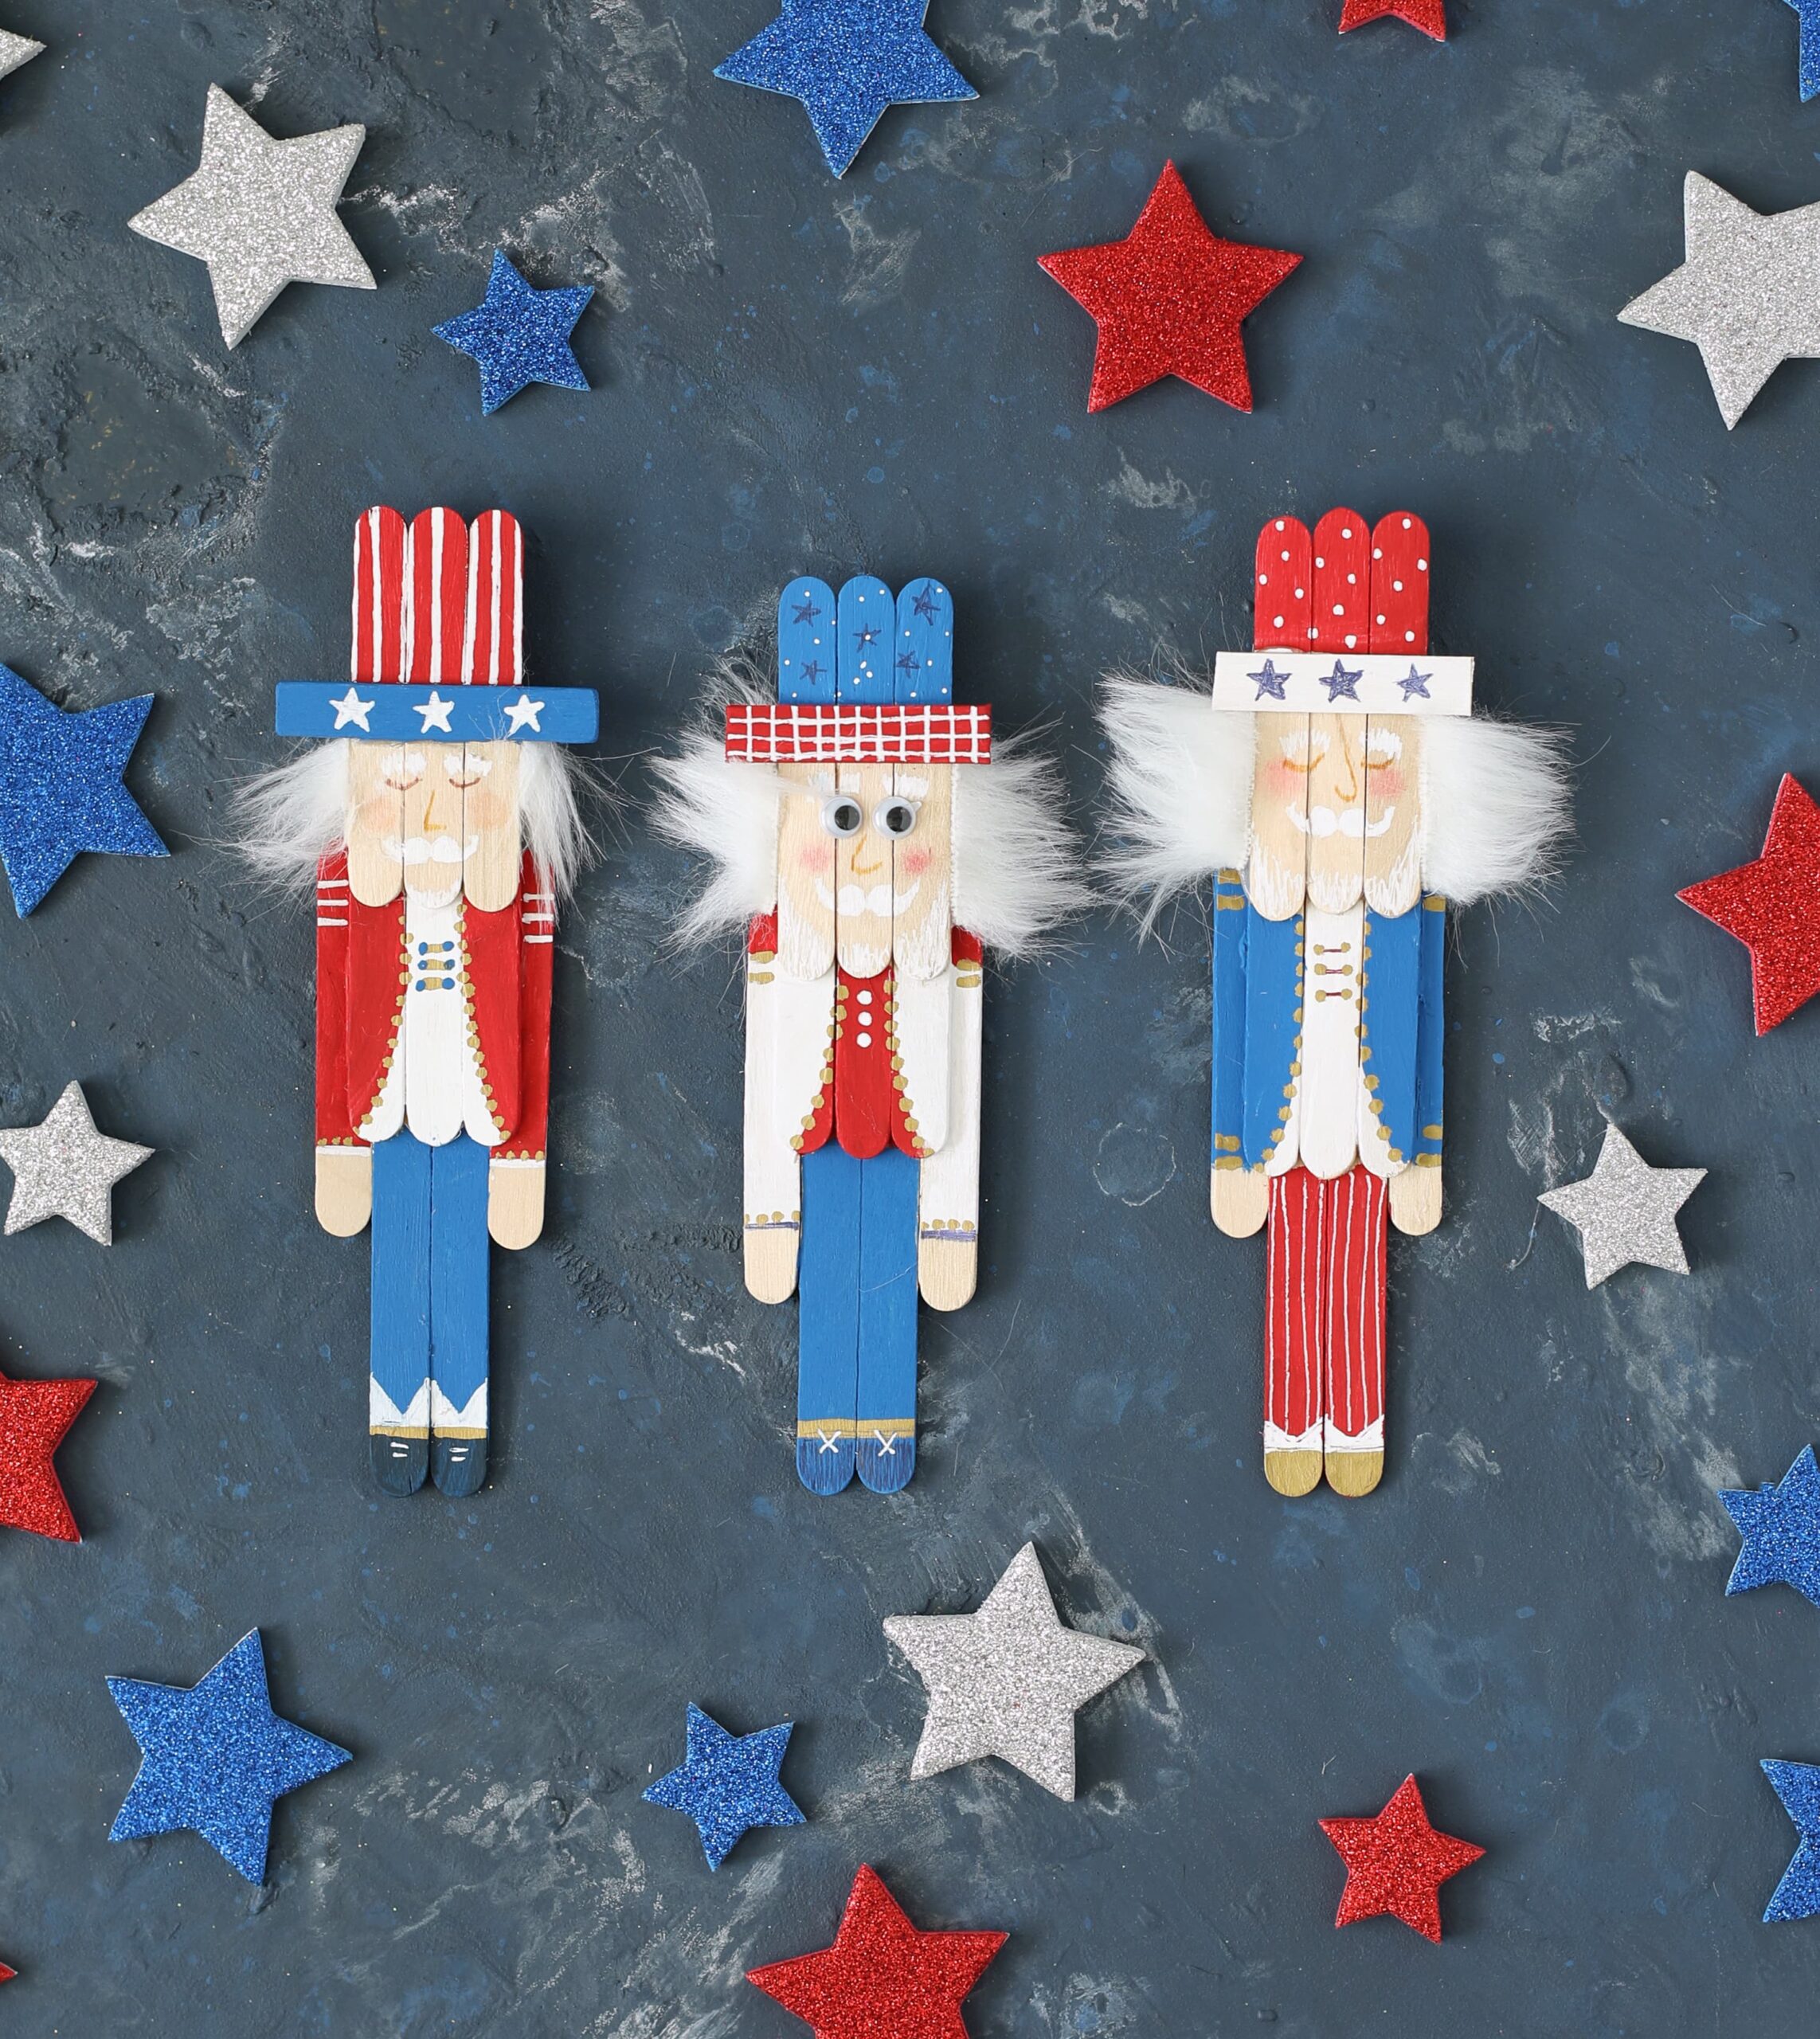 Winter Popsicle Stick Crafts - The Frugal Navy Wife